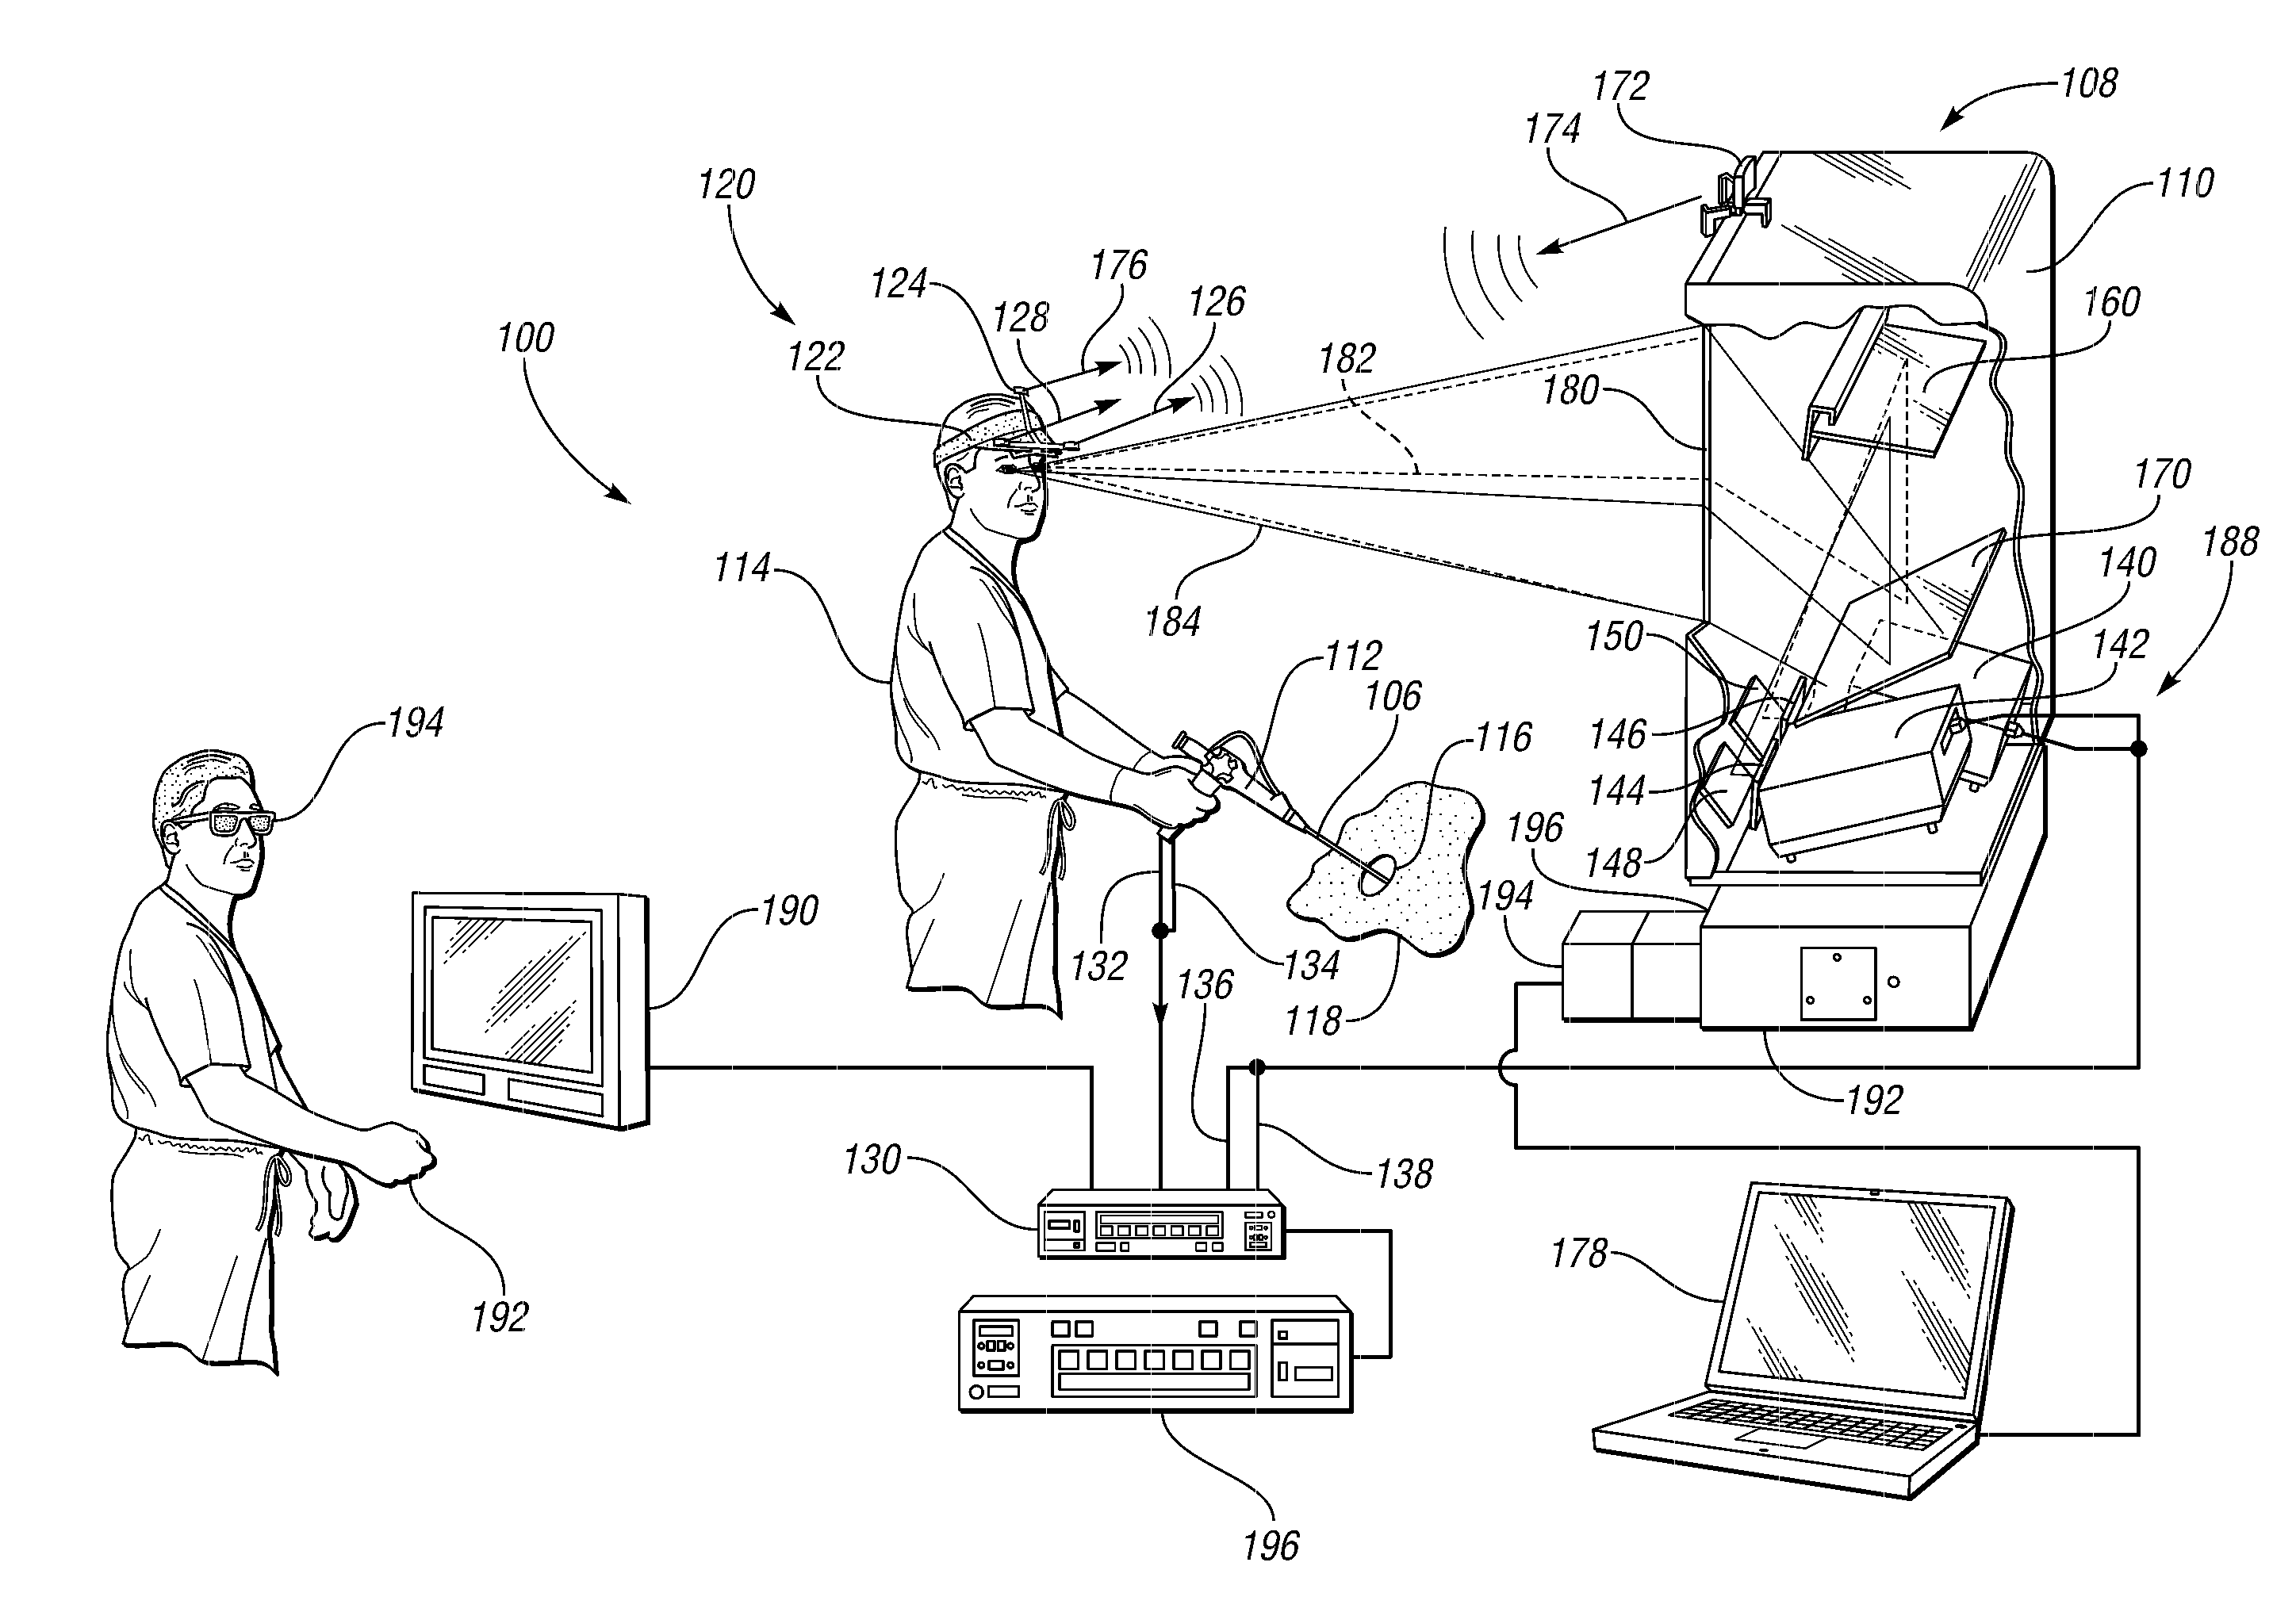 Endoscopic apparatus and method for producing via a holographic optical element an autostereoscopic 3-d image